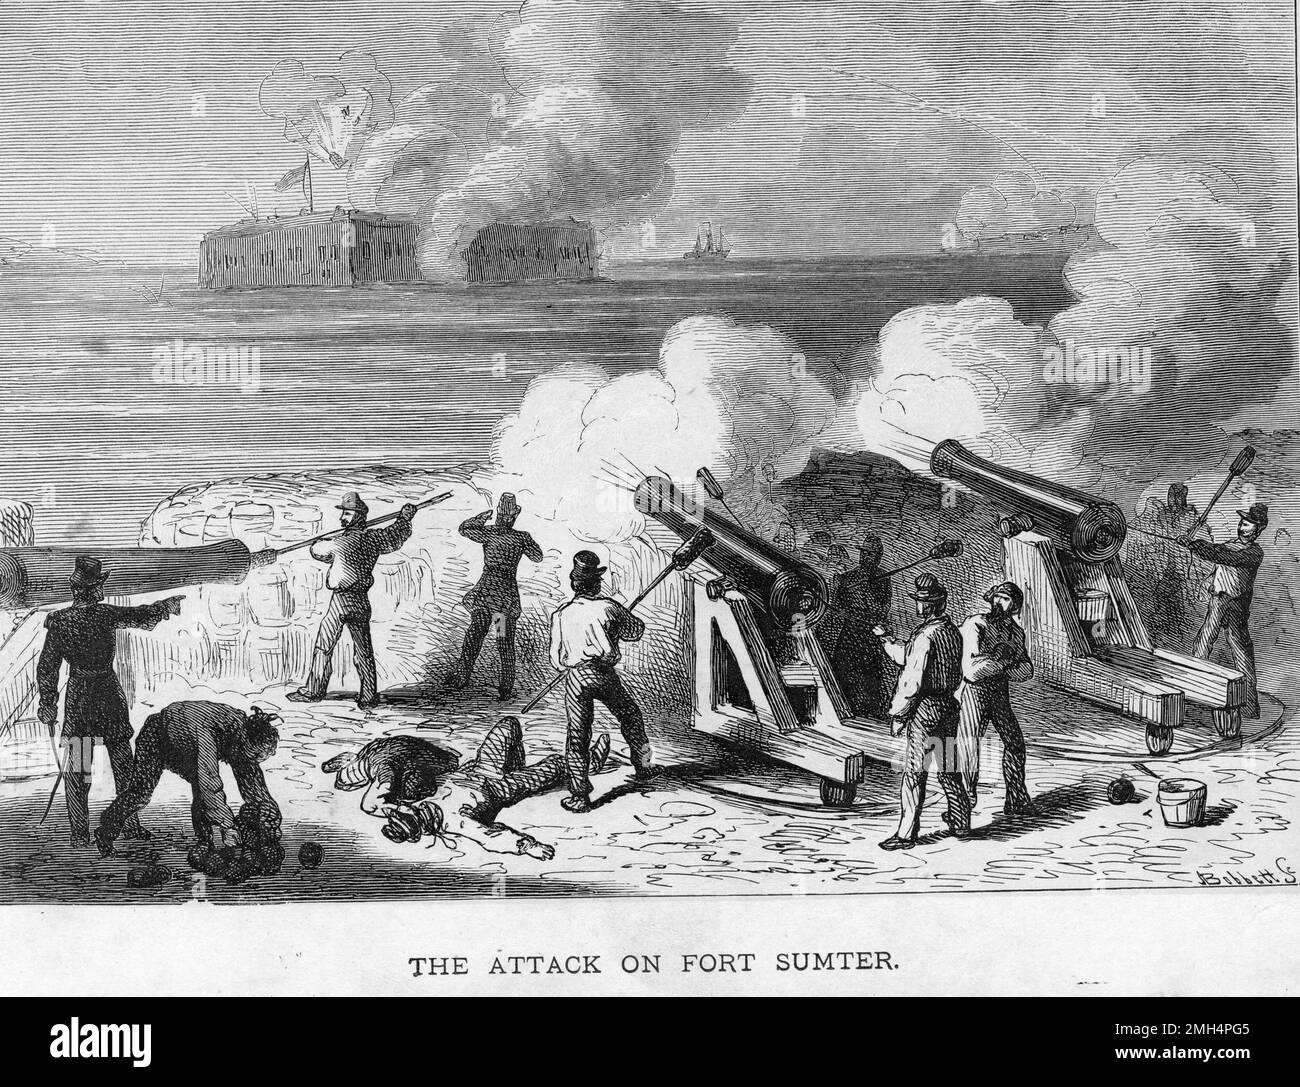 'The Attack on Fort Sumter.' Wood Engraving by Bobbett, 1861-1865. The Confederate bombardment and capture of Fort Sumter was the opening battle in the American Ciil War. Stock Photo